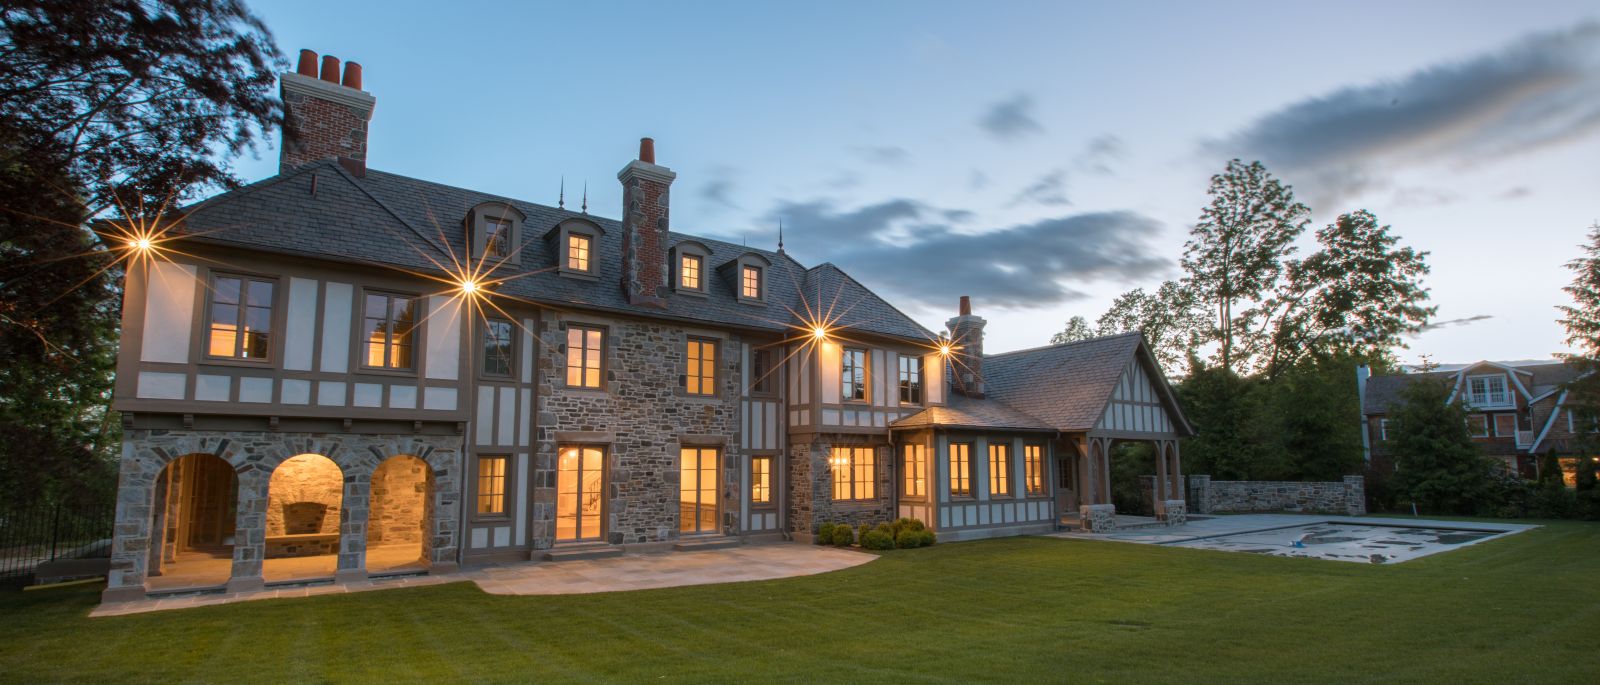 A stunning Greenwich estate mansion is aglow with lights at dusk 